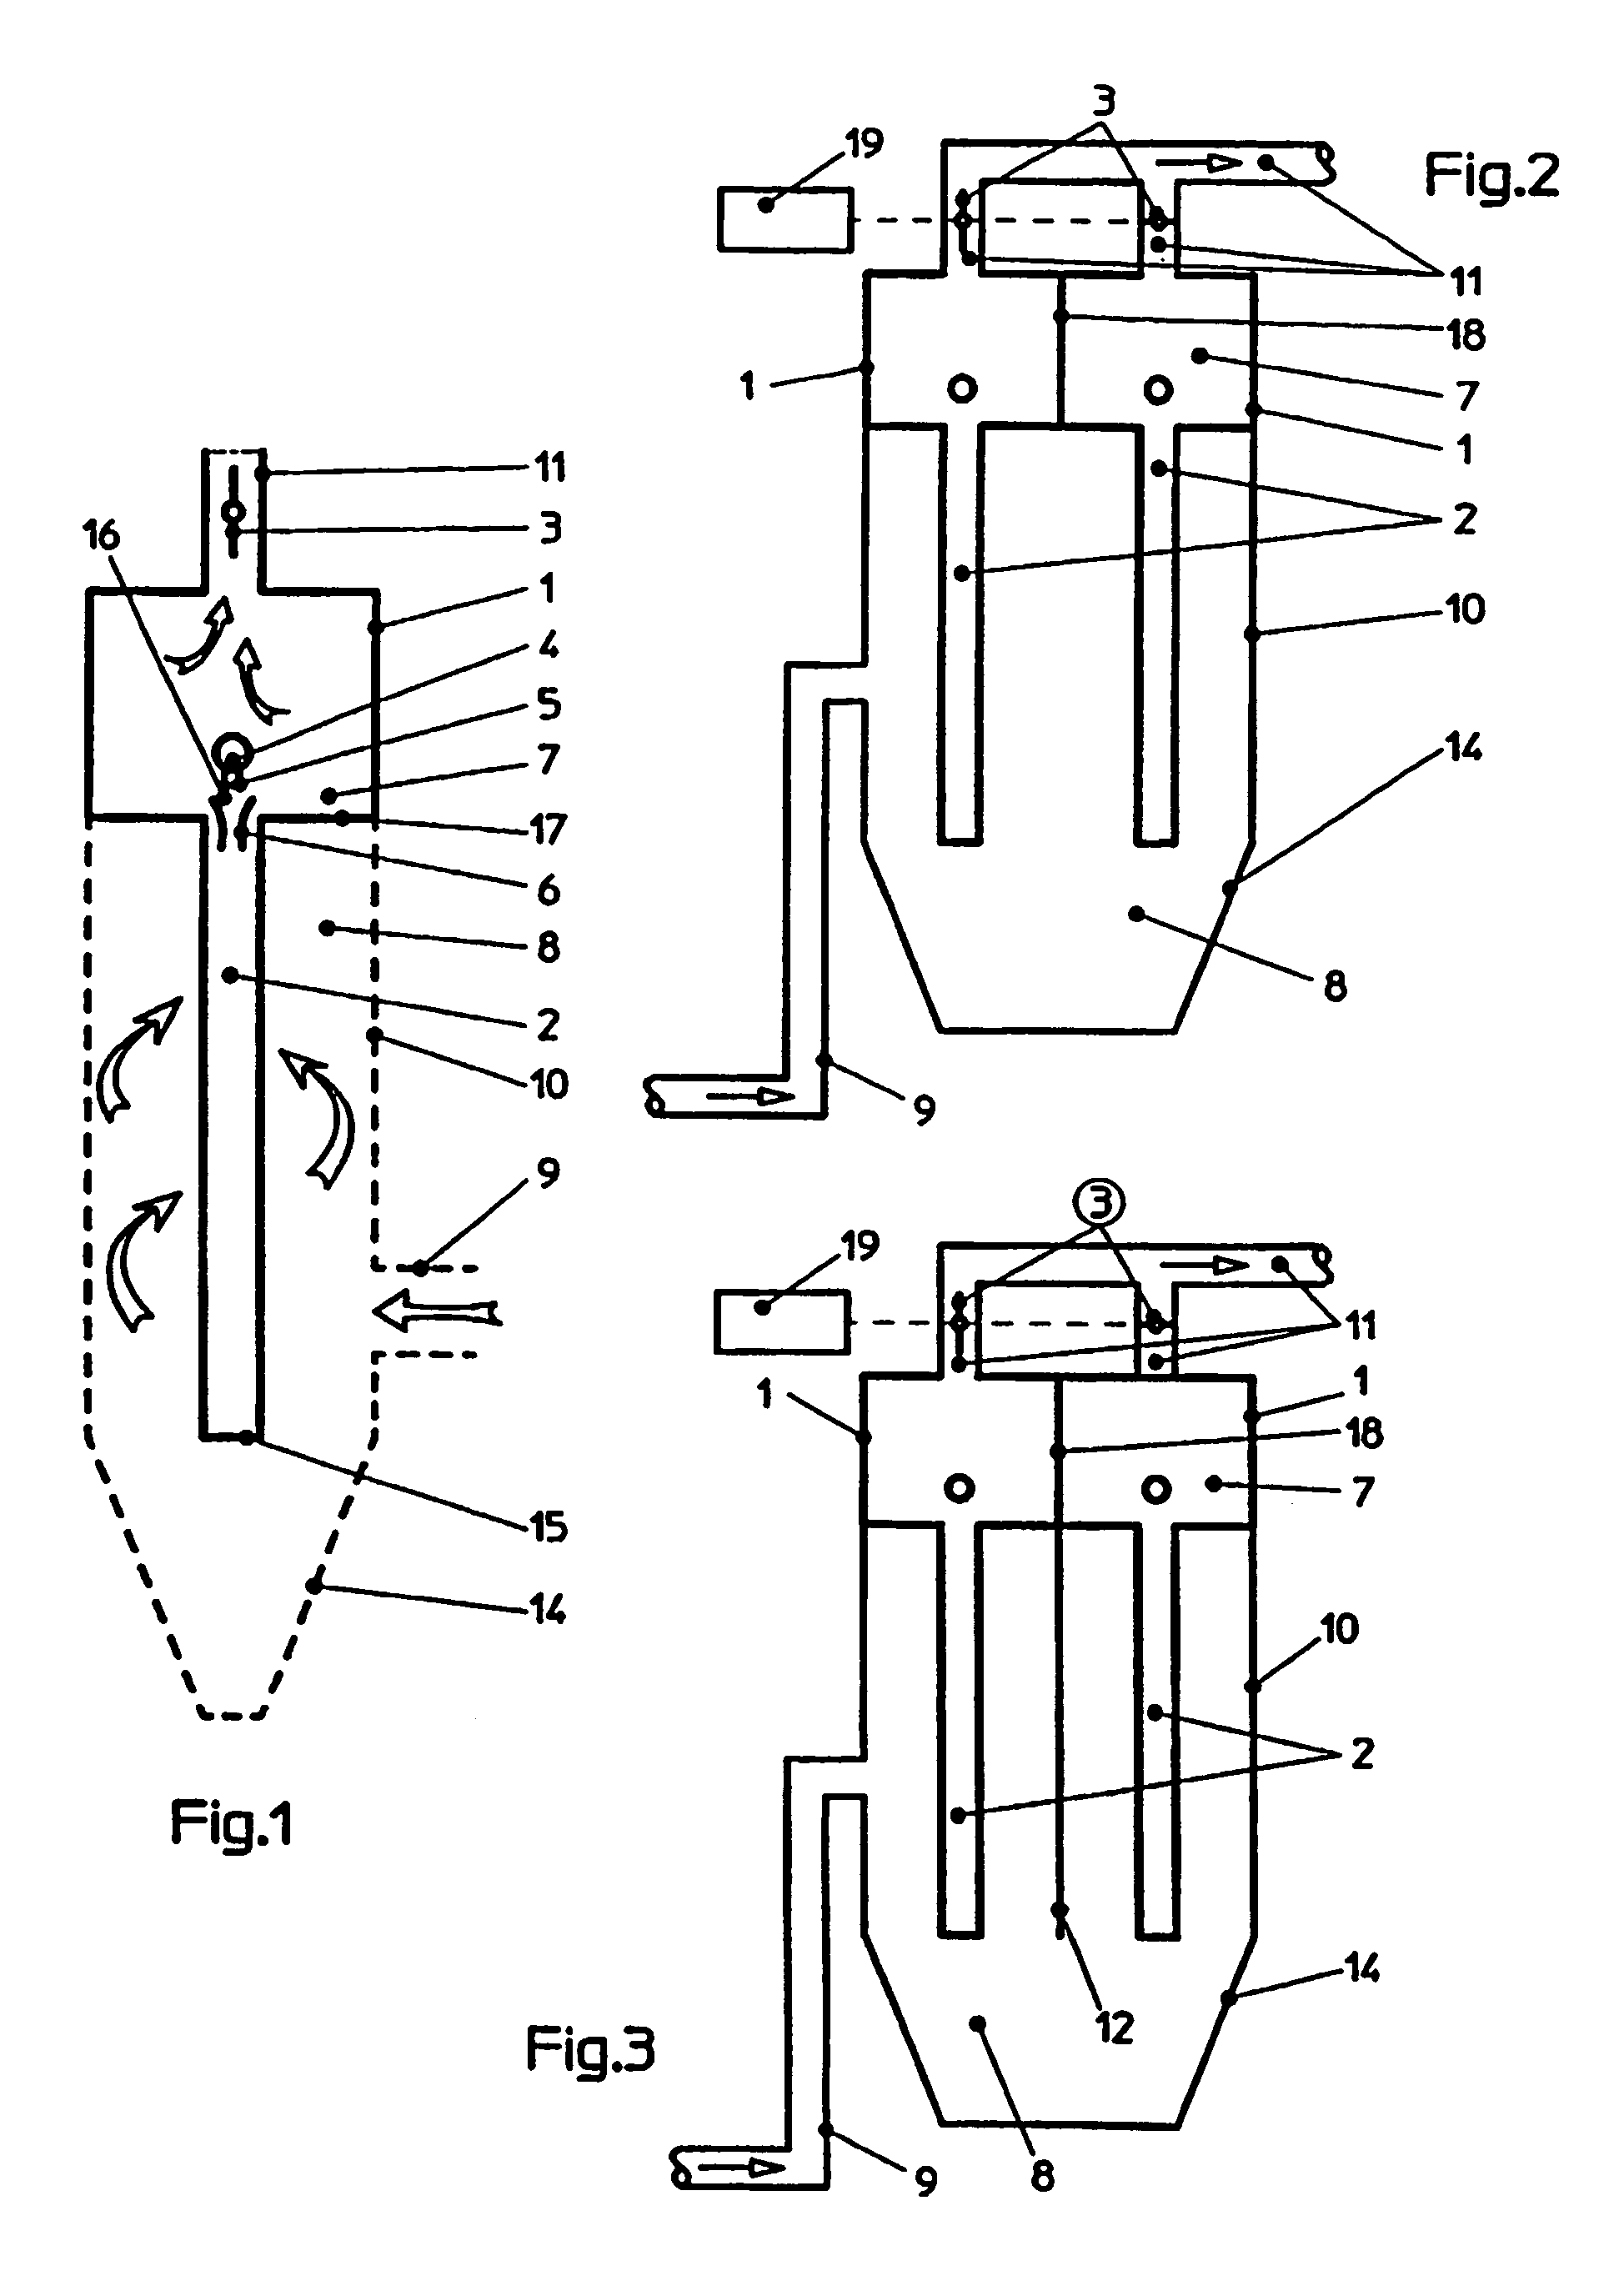 Method and device for cleaning filters for dust-laden waste gases